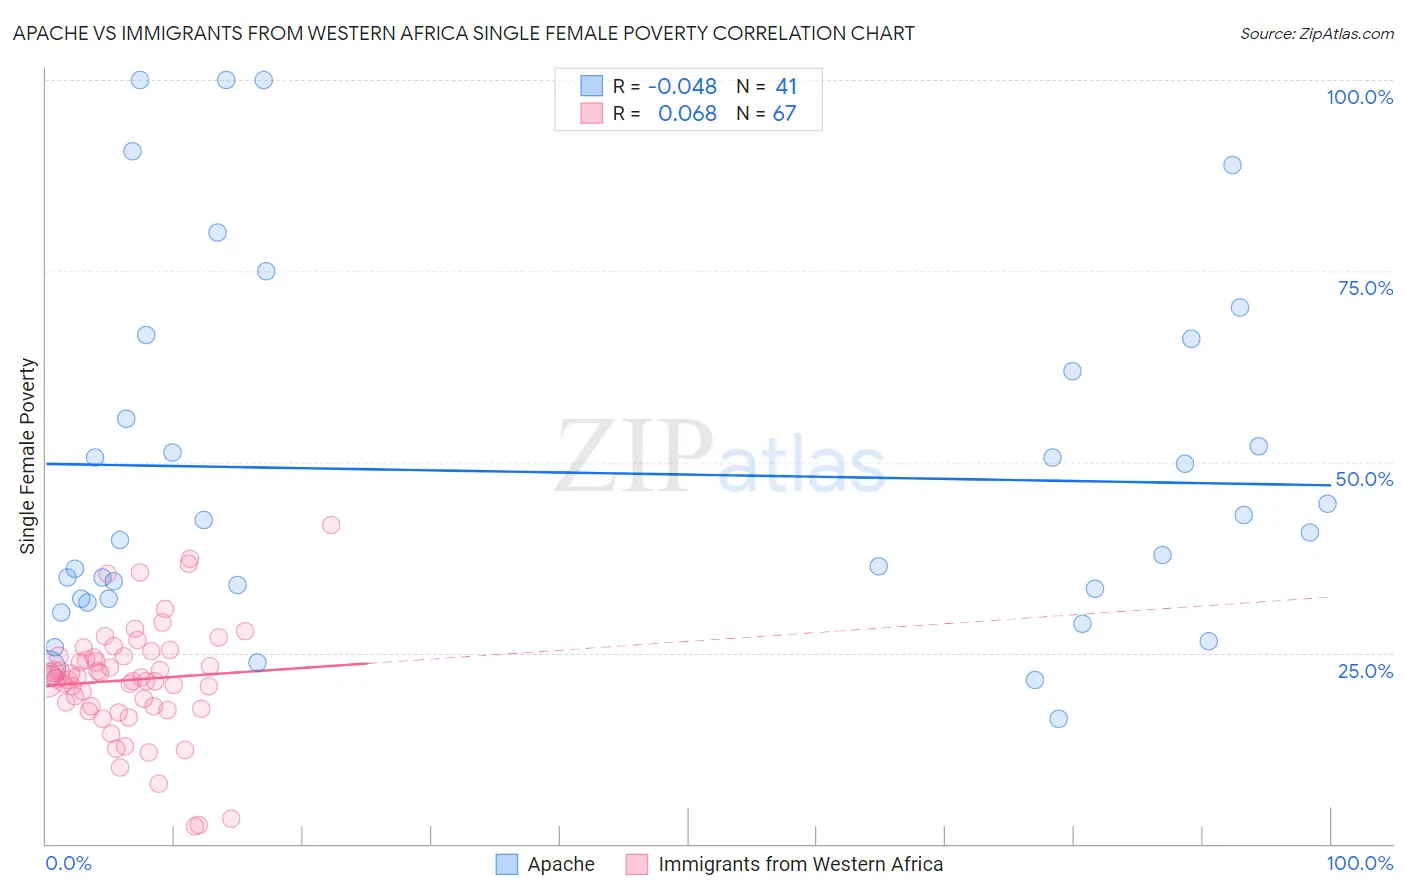 Apache vs Immigrants from Western Africa Single Female Poverty